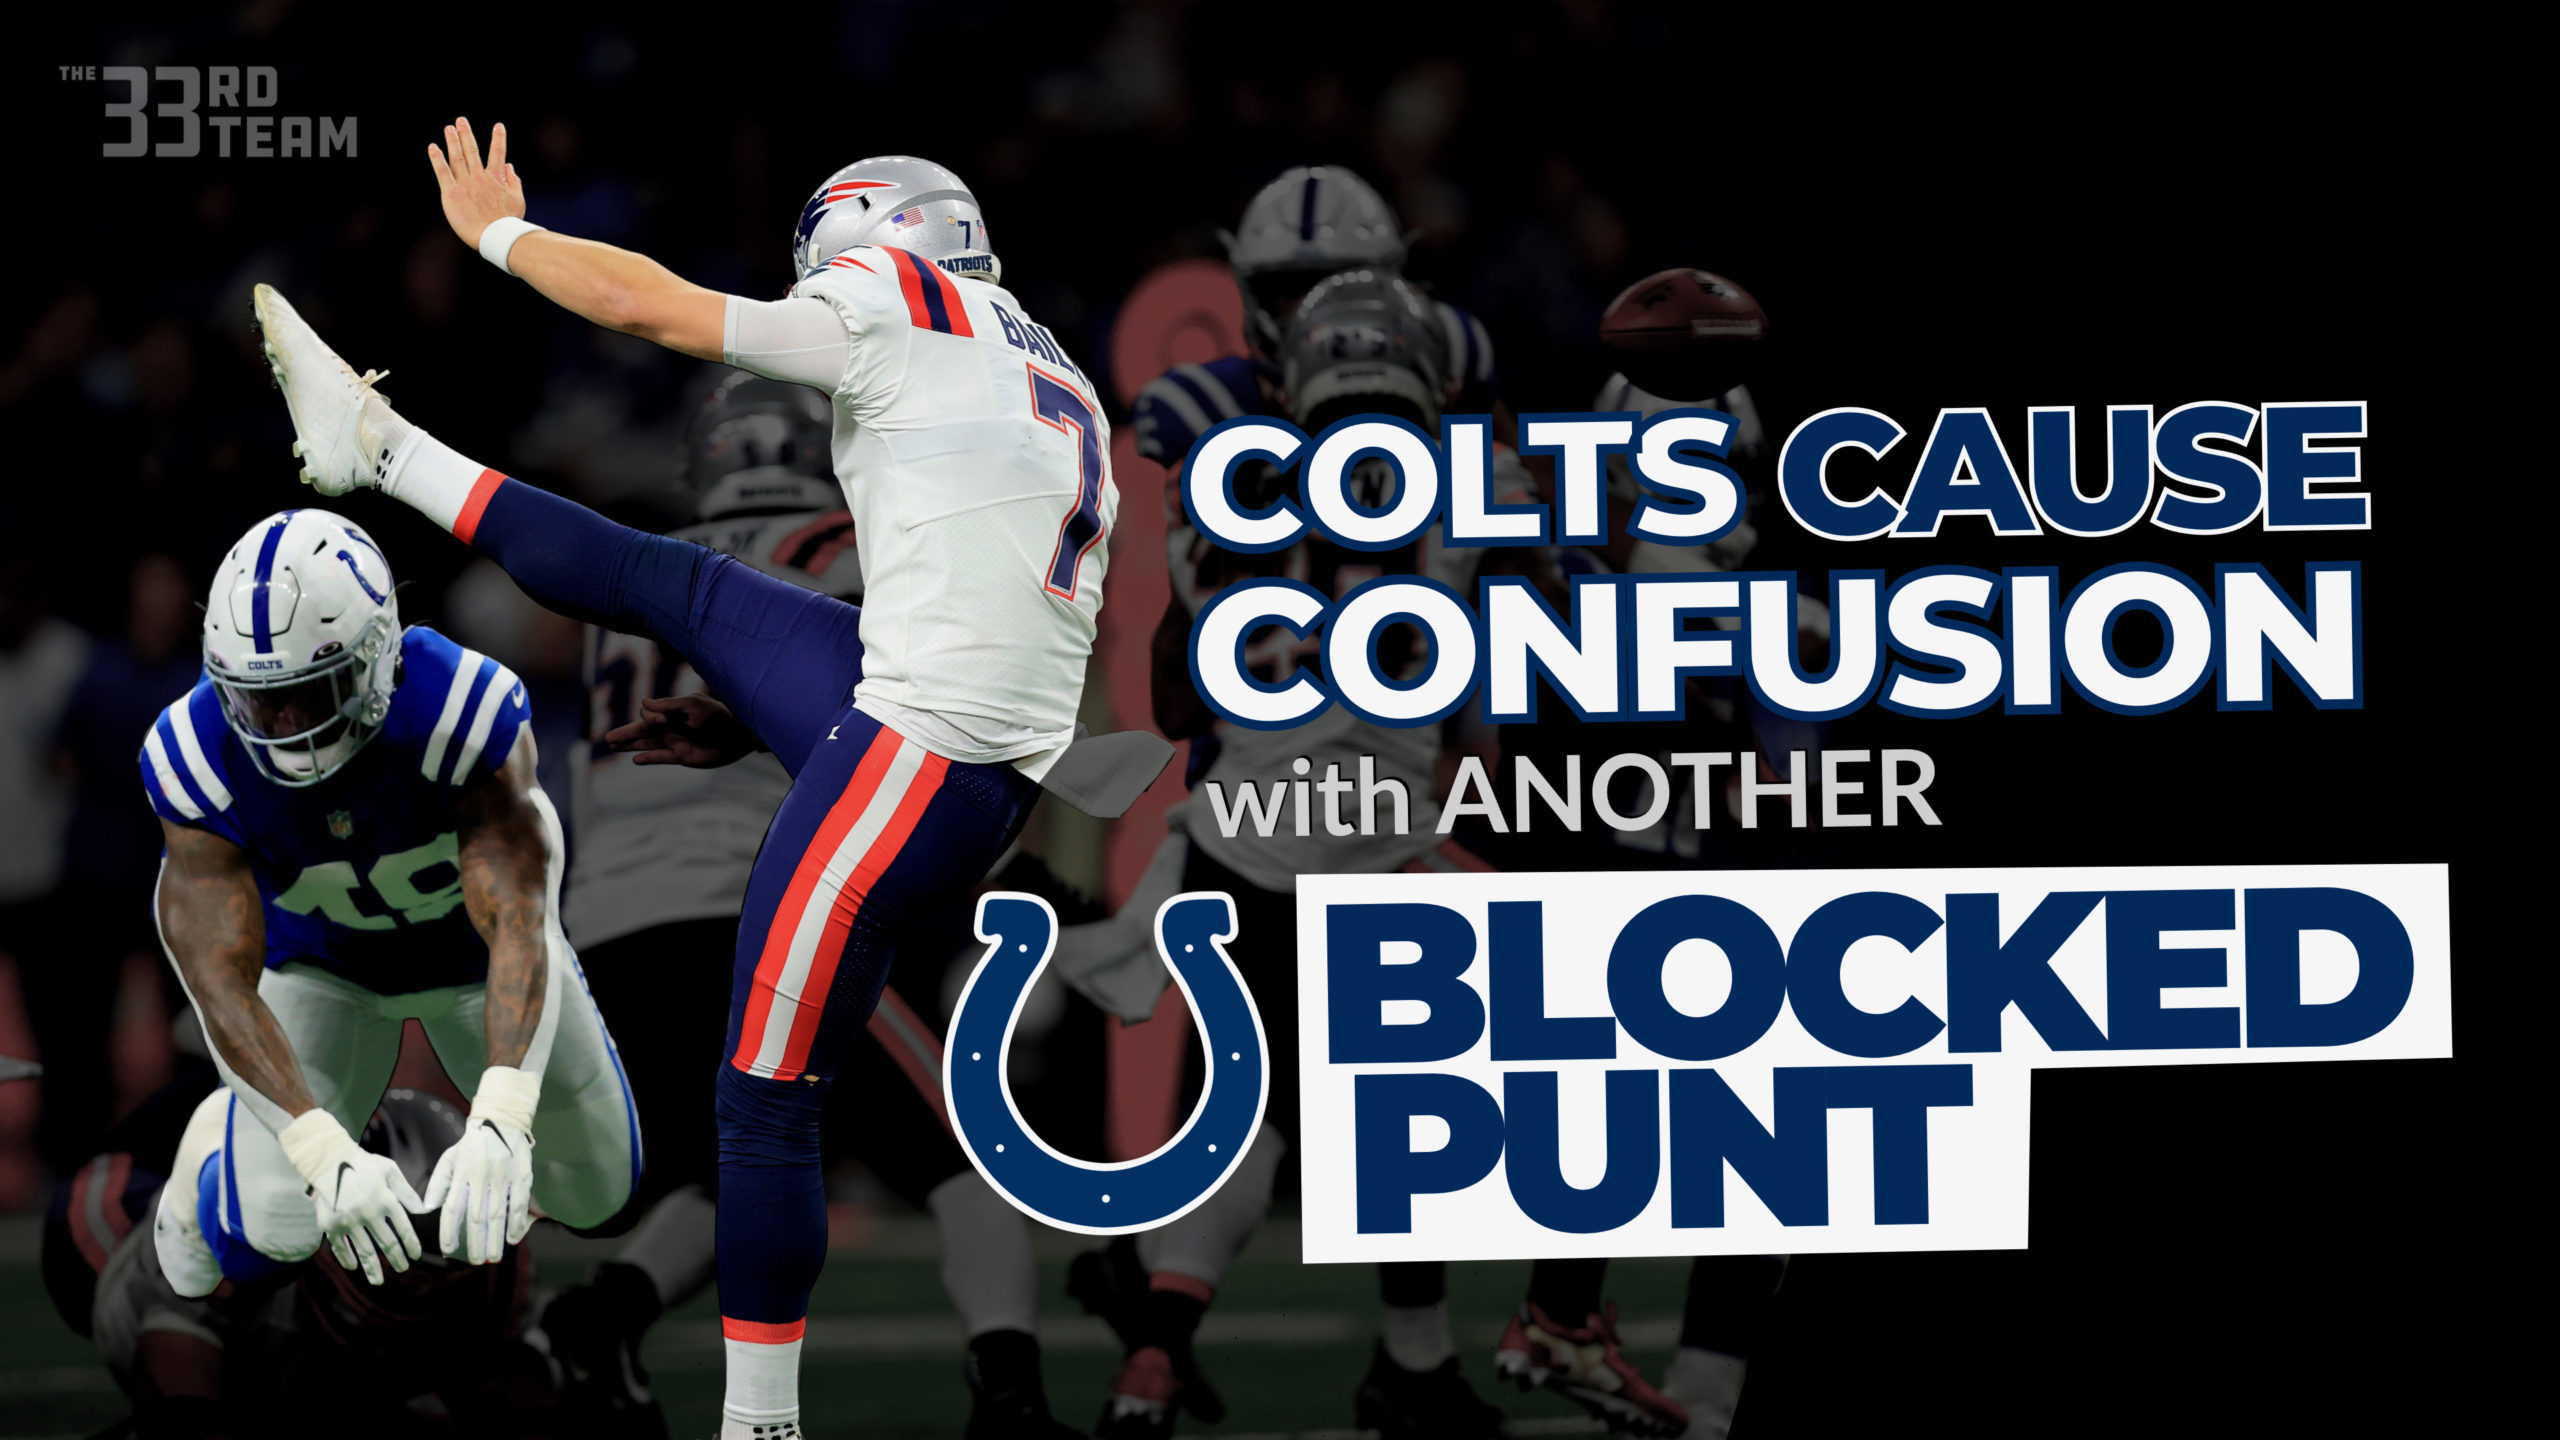 Colts Cause Confusion With Another Blocked Punt: Kotwica Special Teams Report